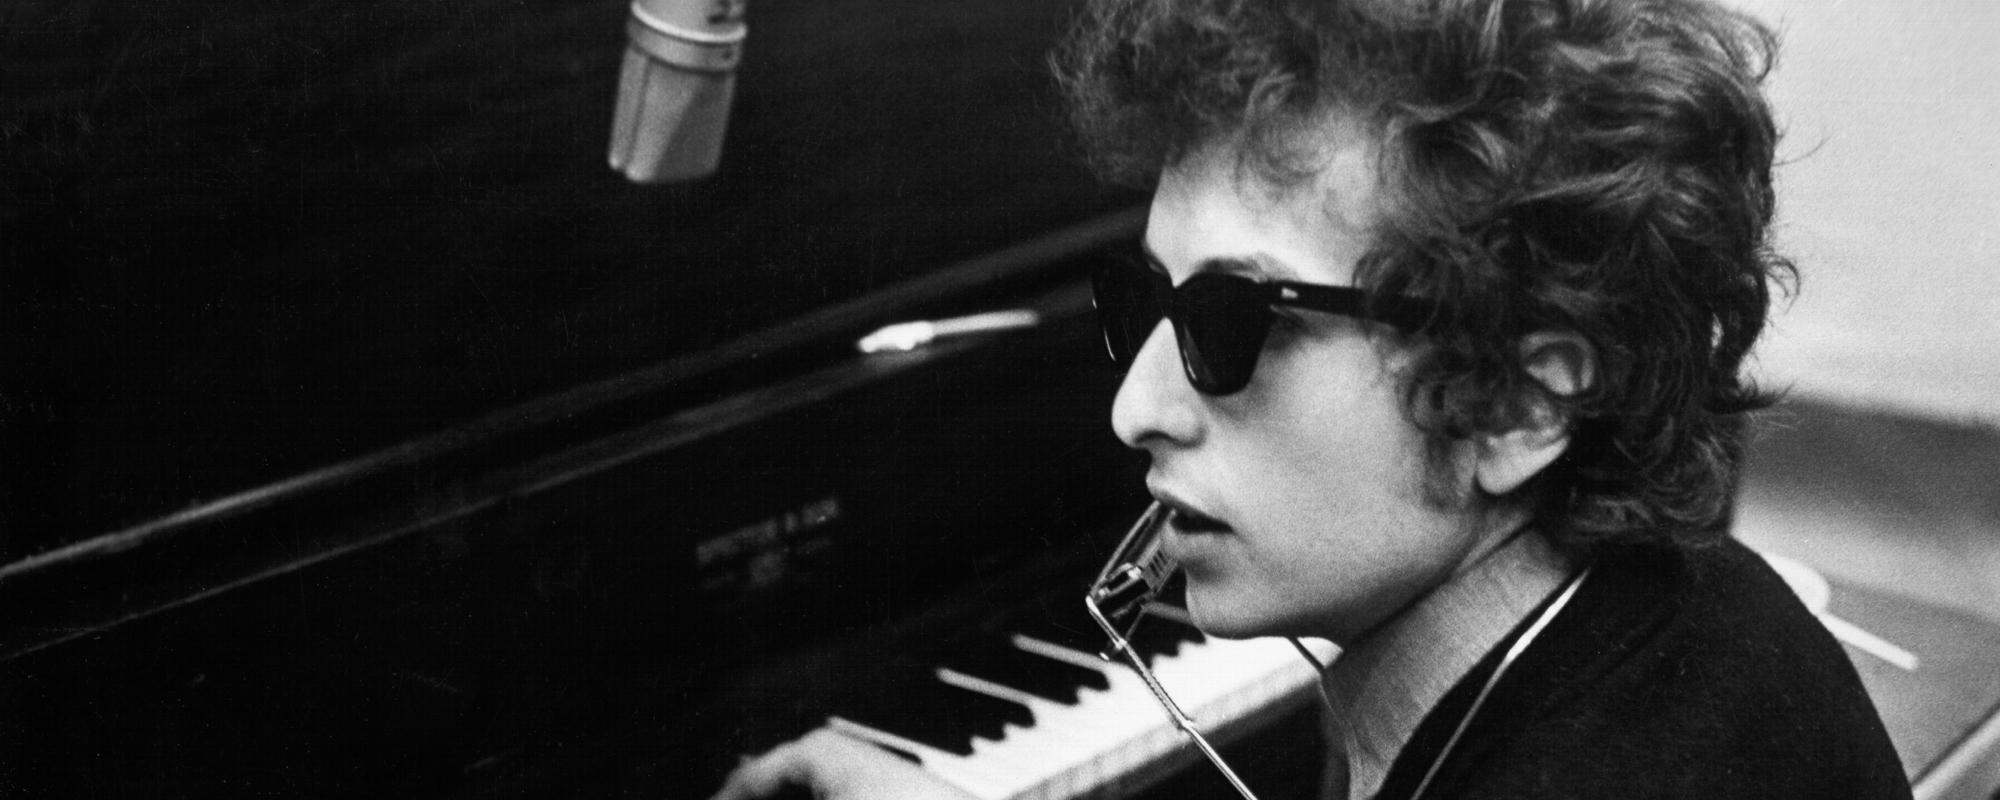 Ranking the 5 Best Songs on Bob Dylan’s Stunning ‘Bringing It All Back Home’